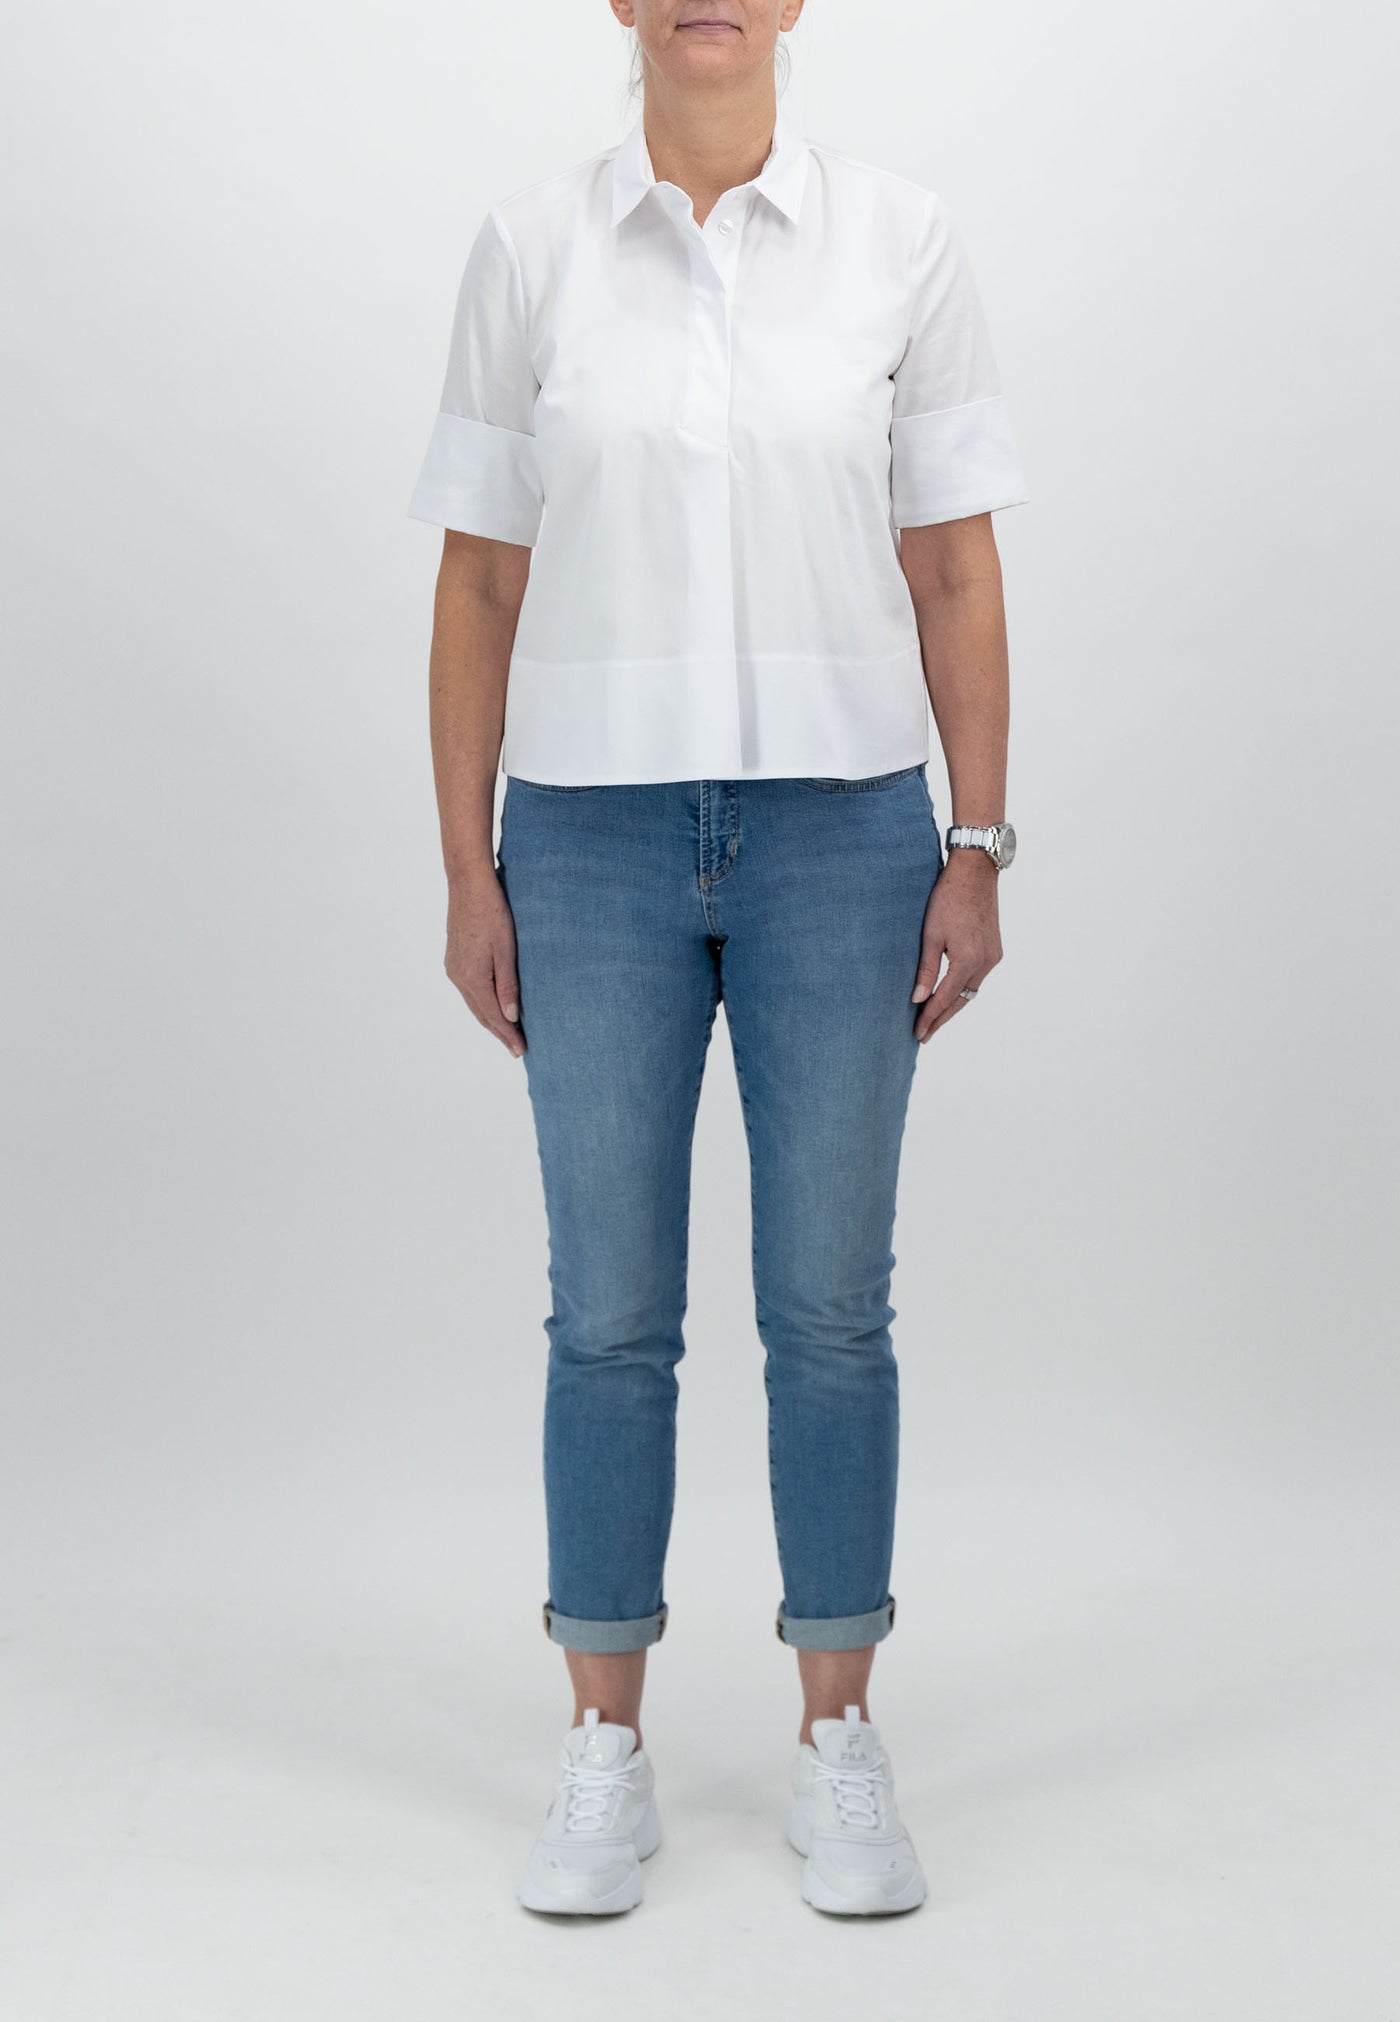 White Short Sleeve Blouse WIth Collar & Concealed Buttons